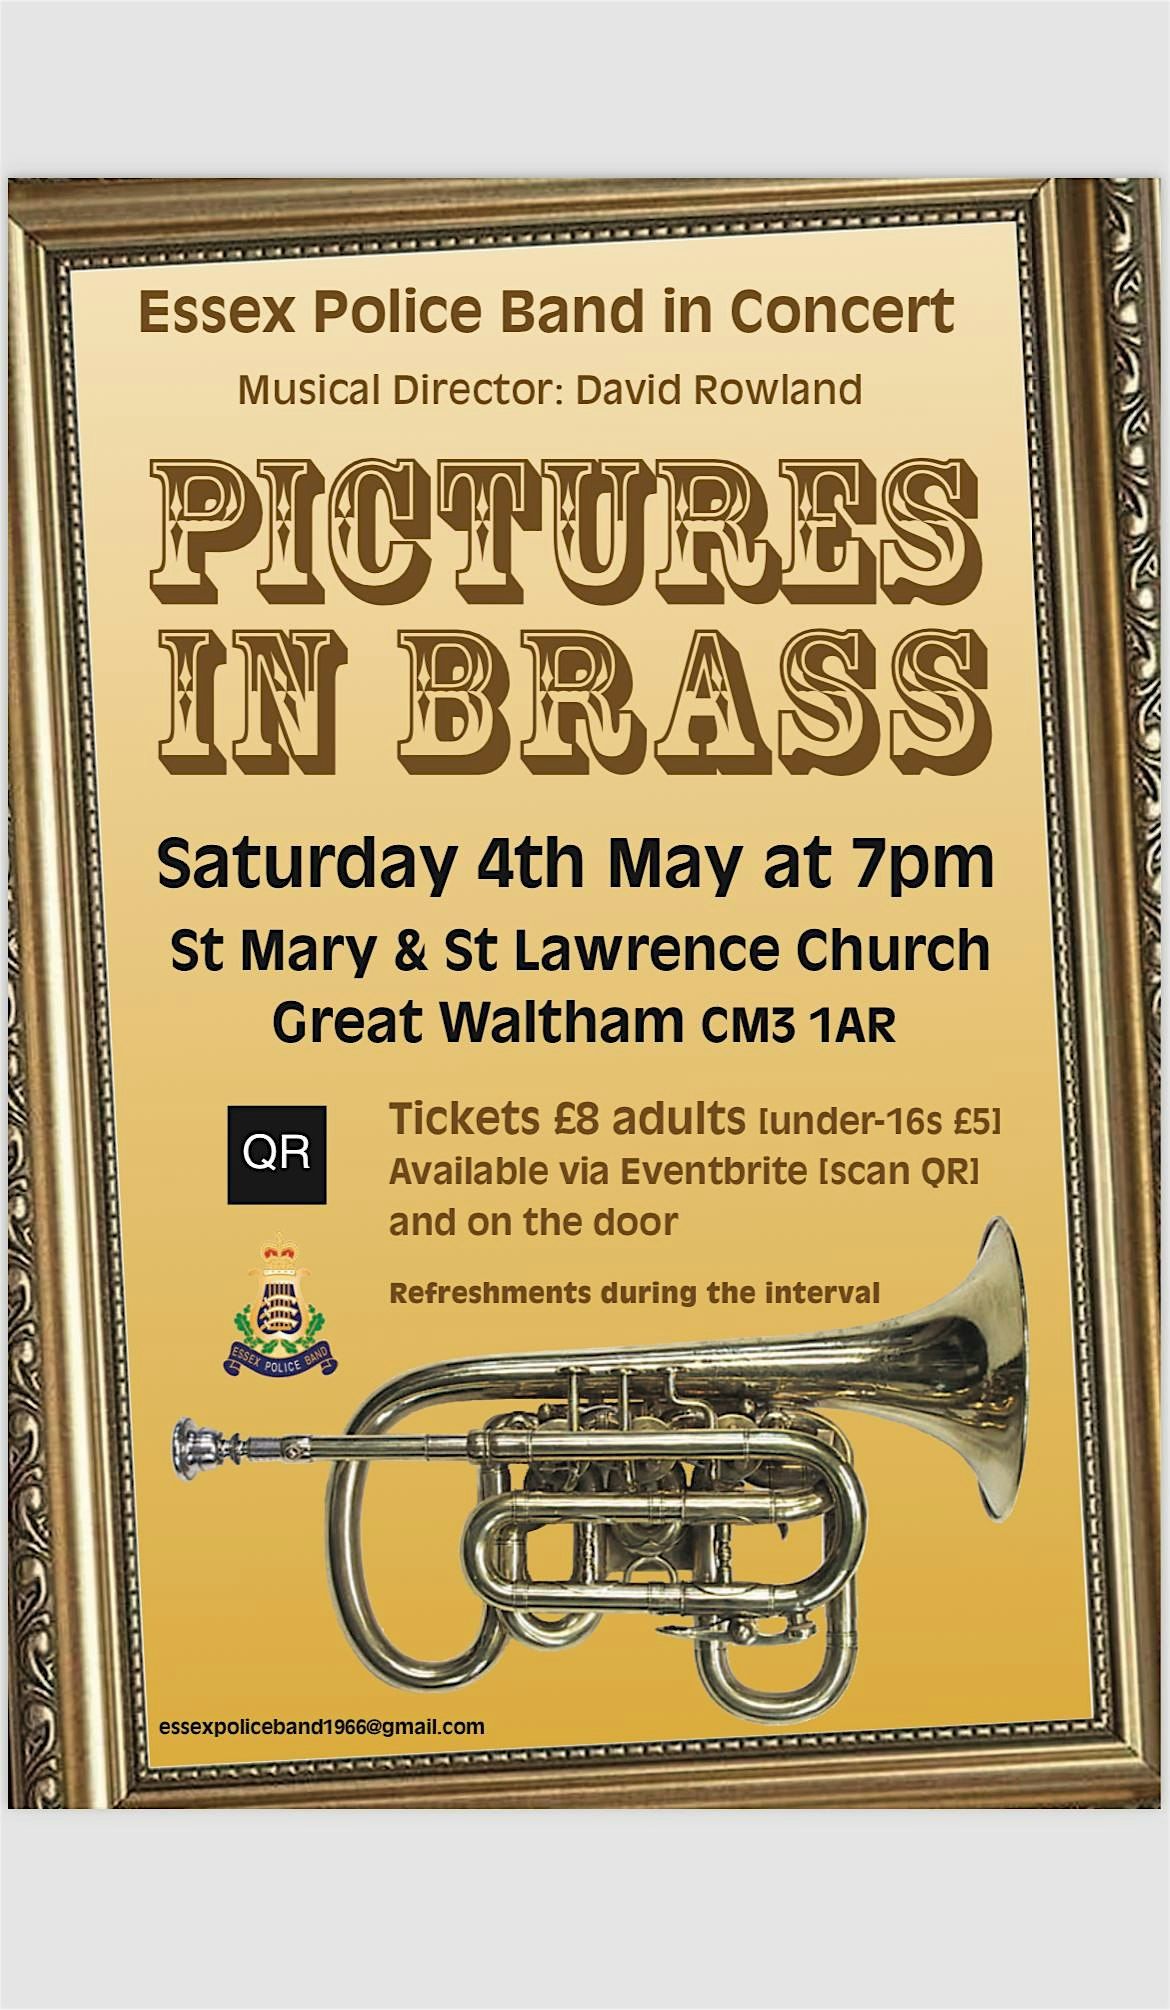 Essex Police Band Pictures in Brass